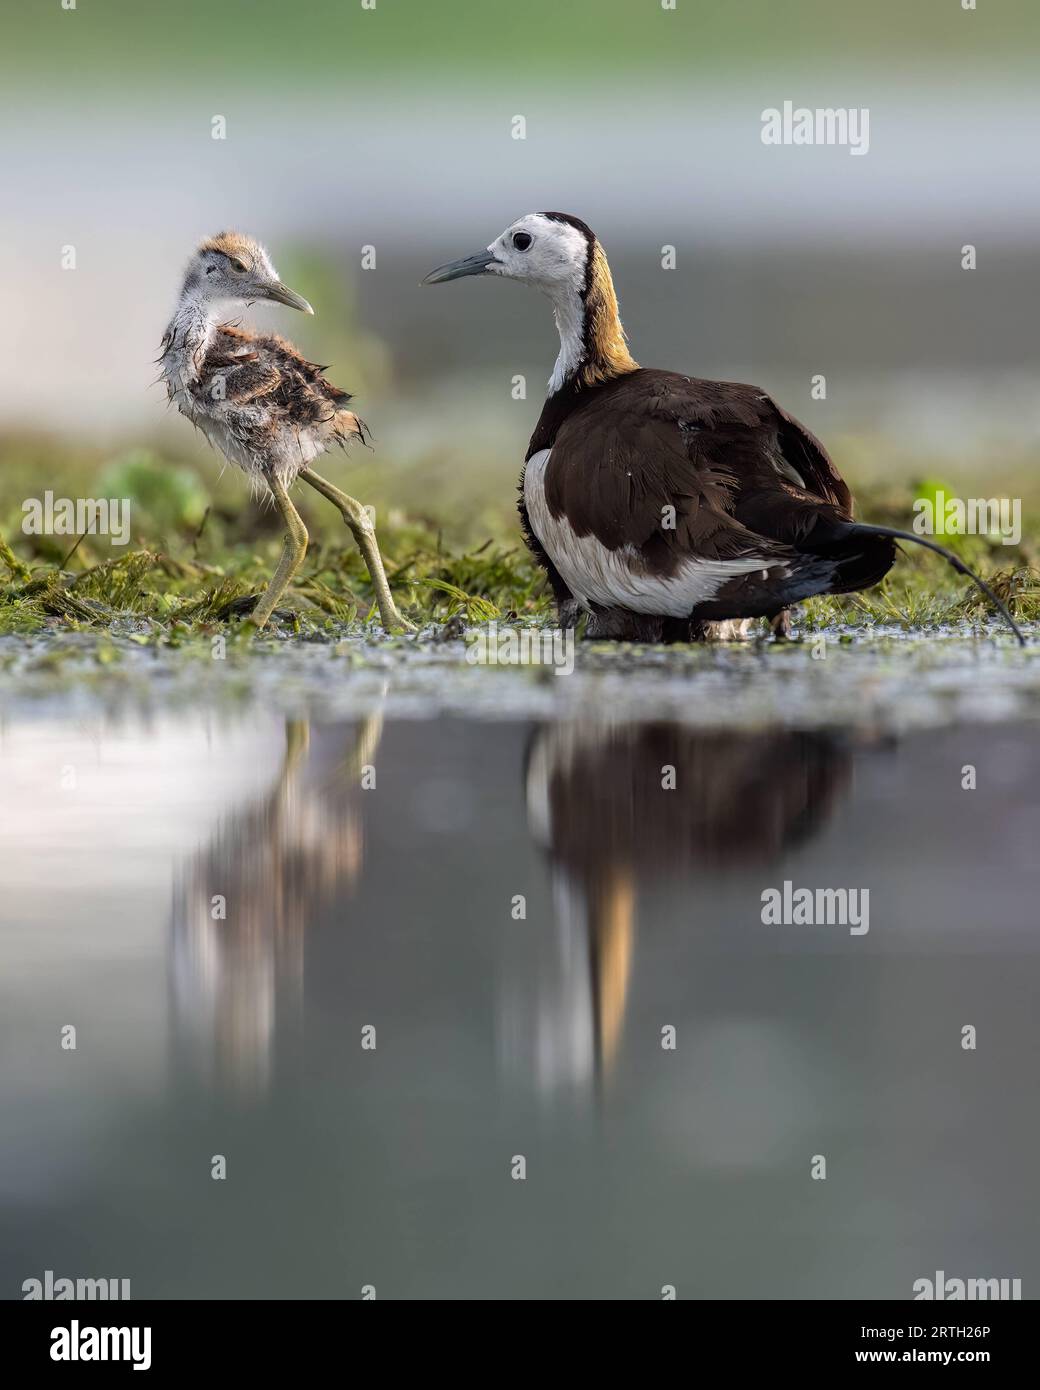 Father pheasant jacana looks at cheeky chick, as the chick walks off. West Bengal, India: CUTE images of pheasant tailed Jacanas chicks seeking shelte Stock Photo